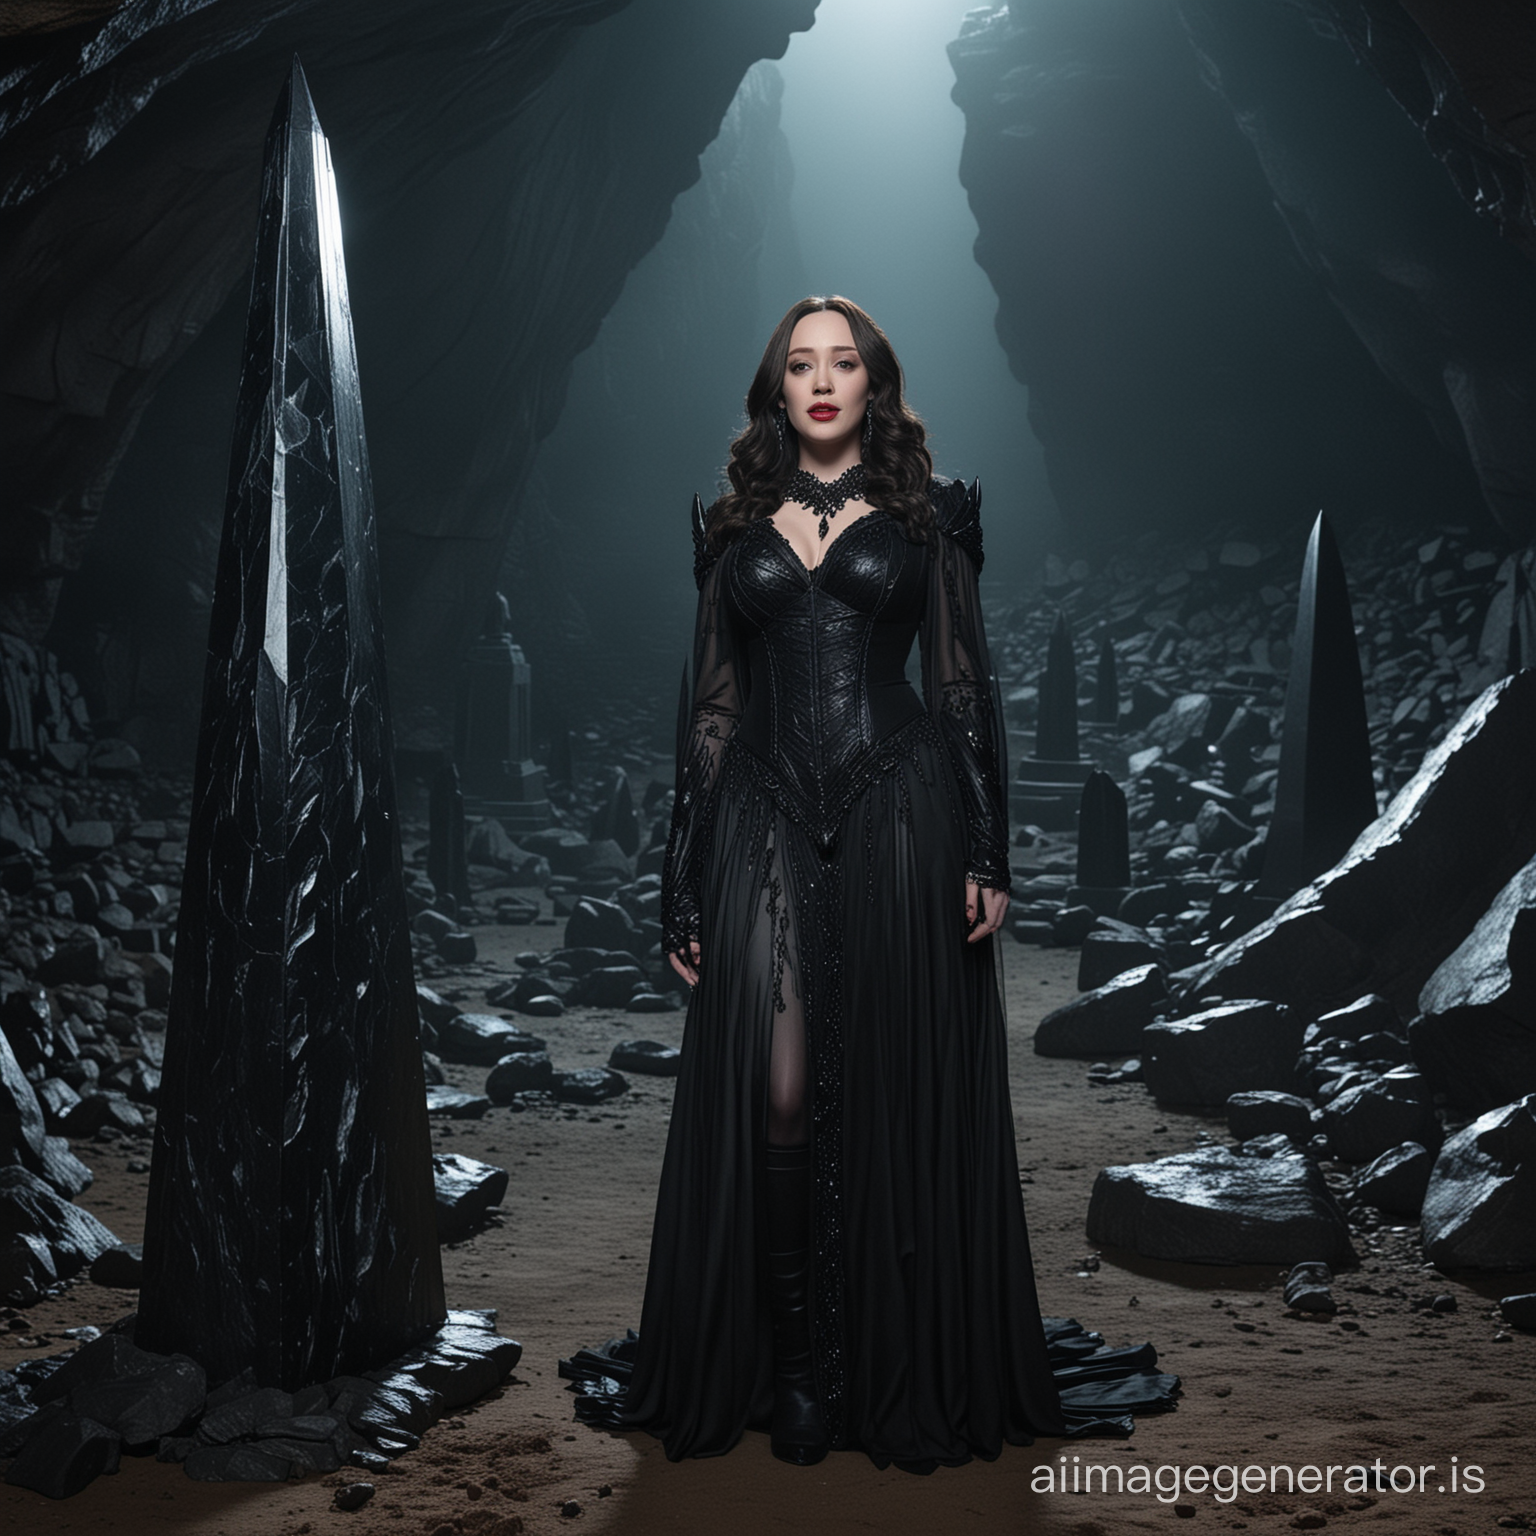 Kat Dennings dressed in an outfit based on a raven performing a ritual next to a large black crystal obelisk in a dark cave